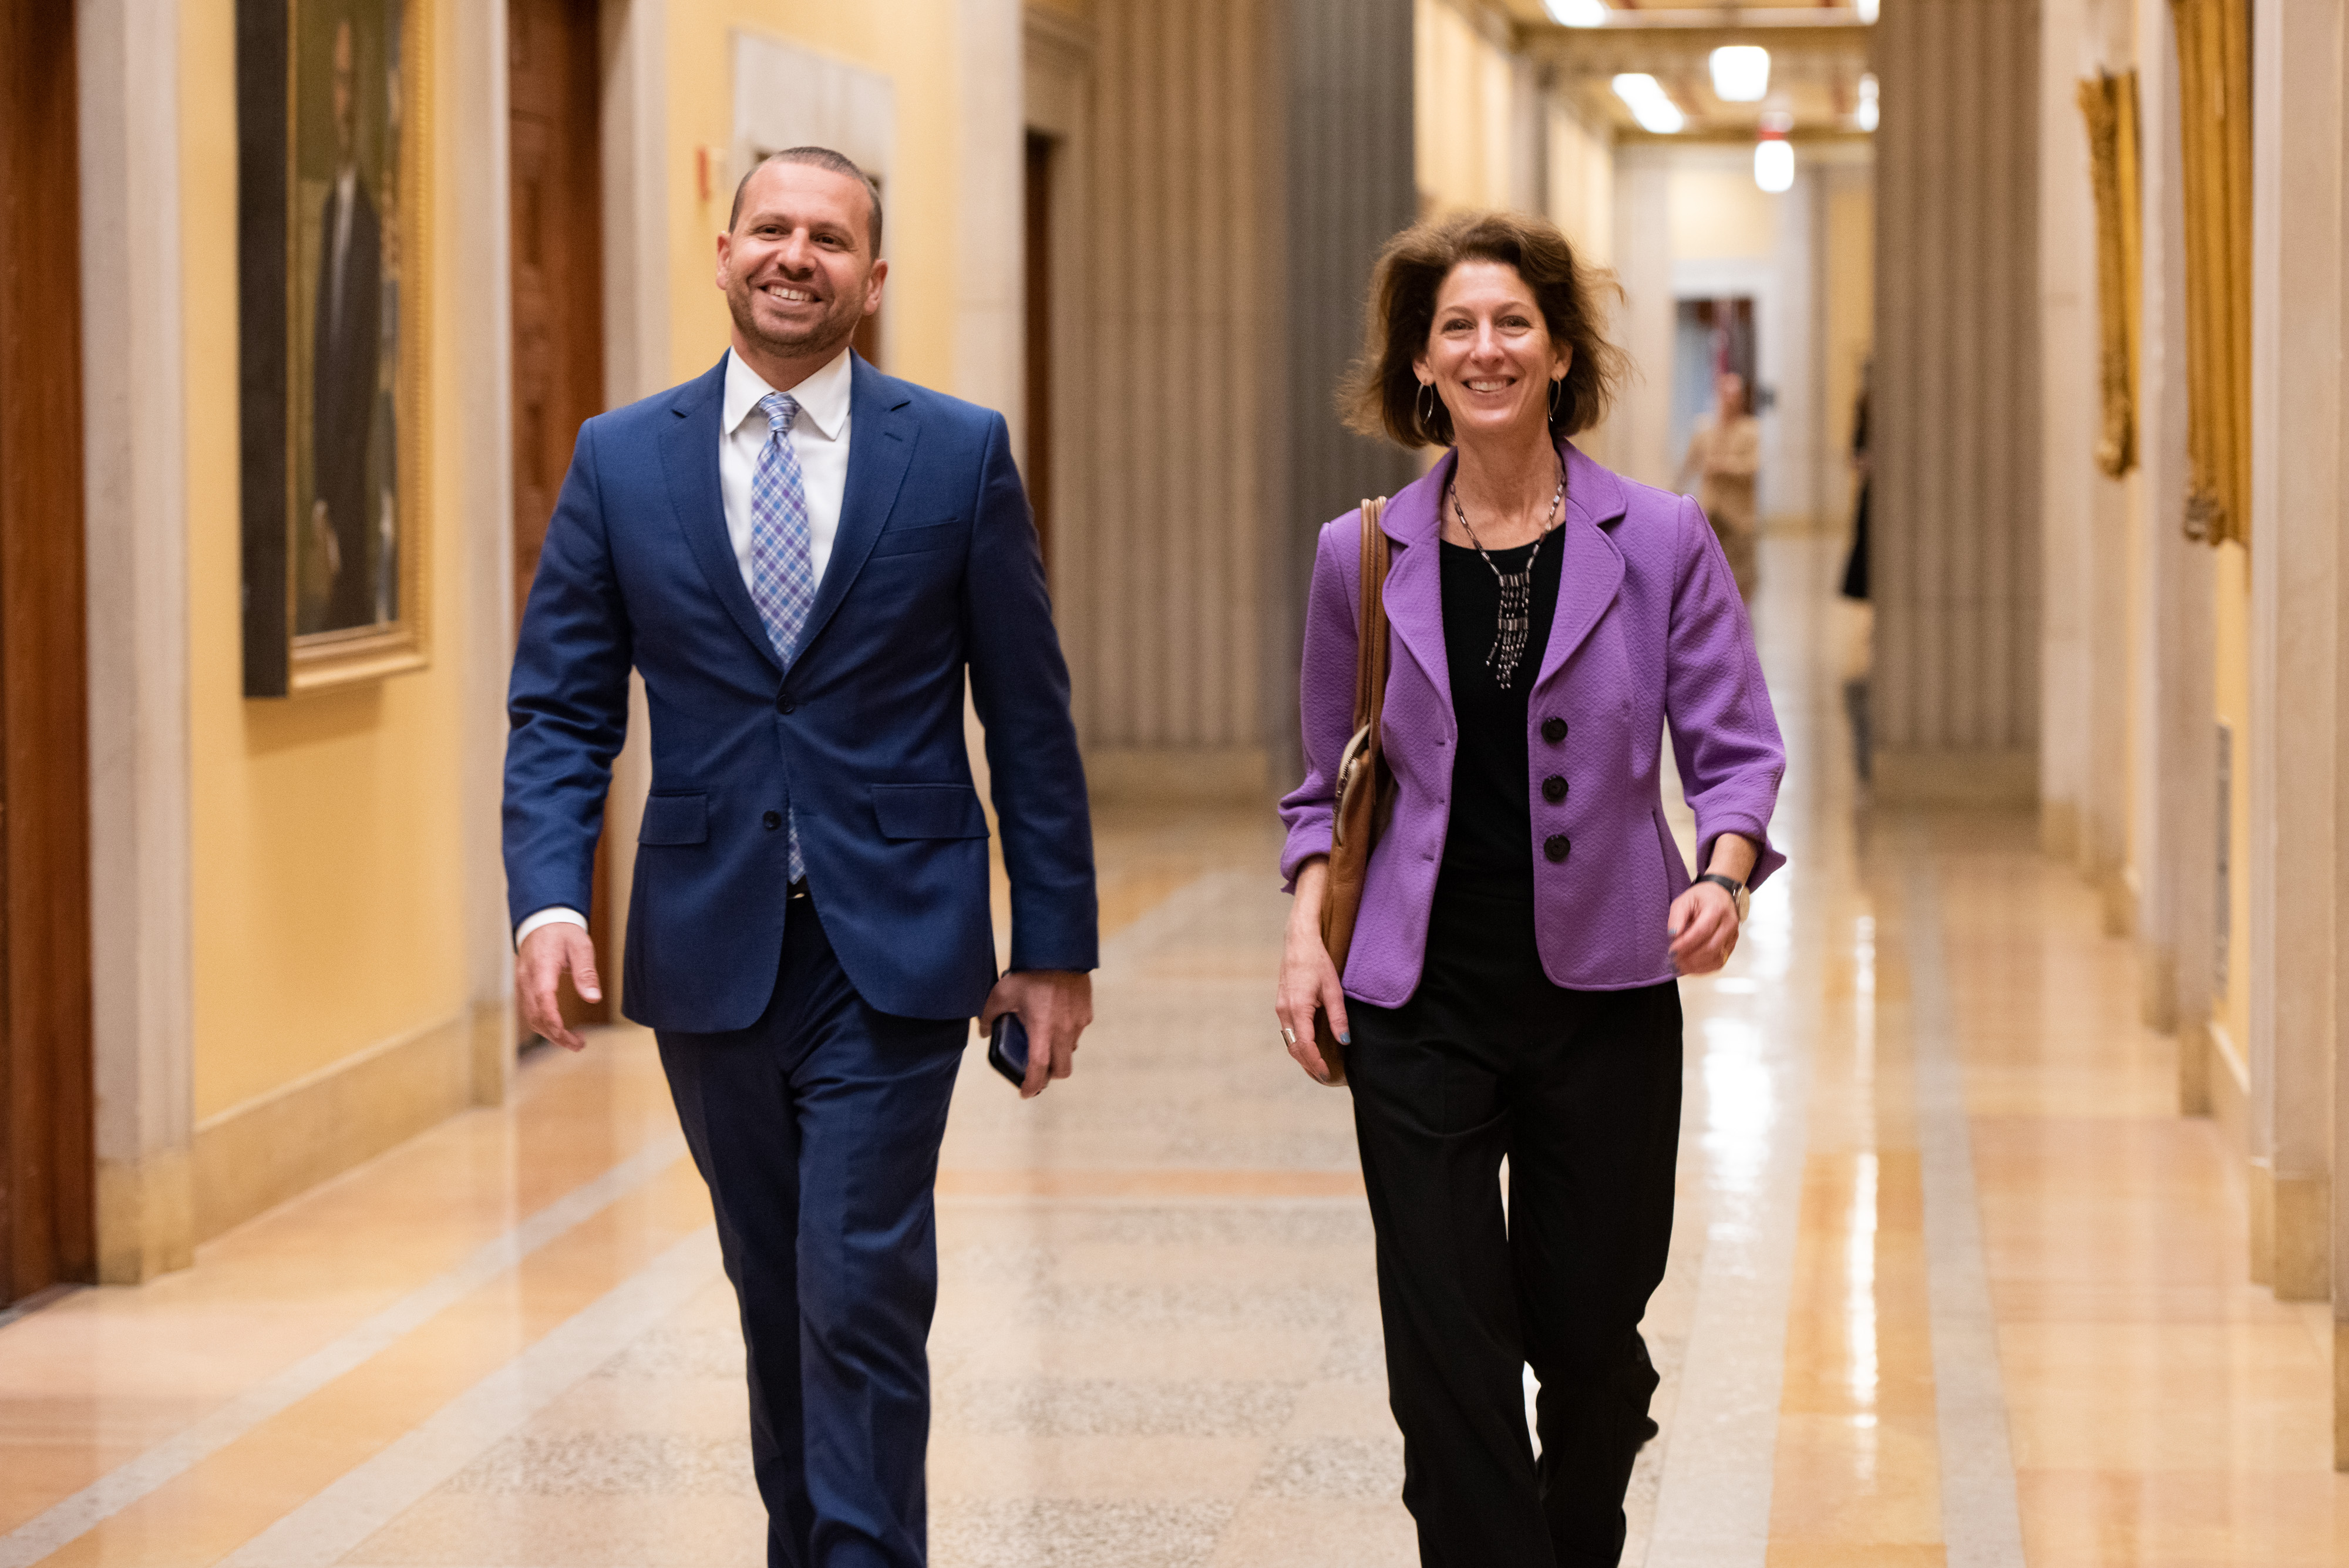 Assistant Attorney General Amy L. Solomon walking alongside Principal Deputy Assistant Attorney General Brent Cohen in a government building hallway, both smiling and dressed in business attire.